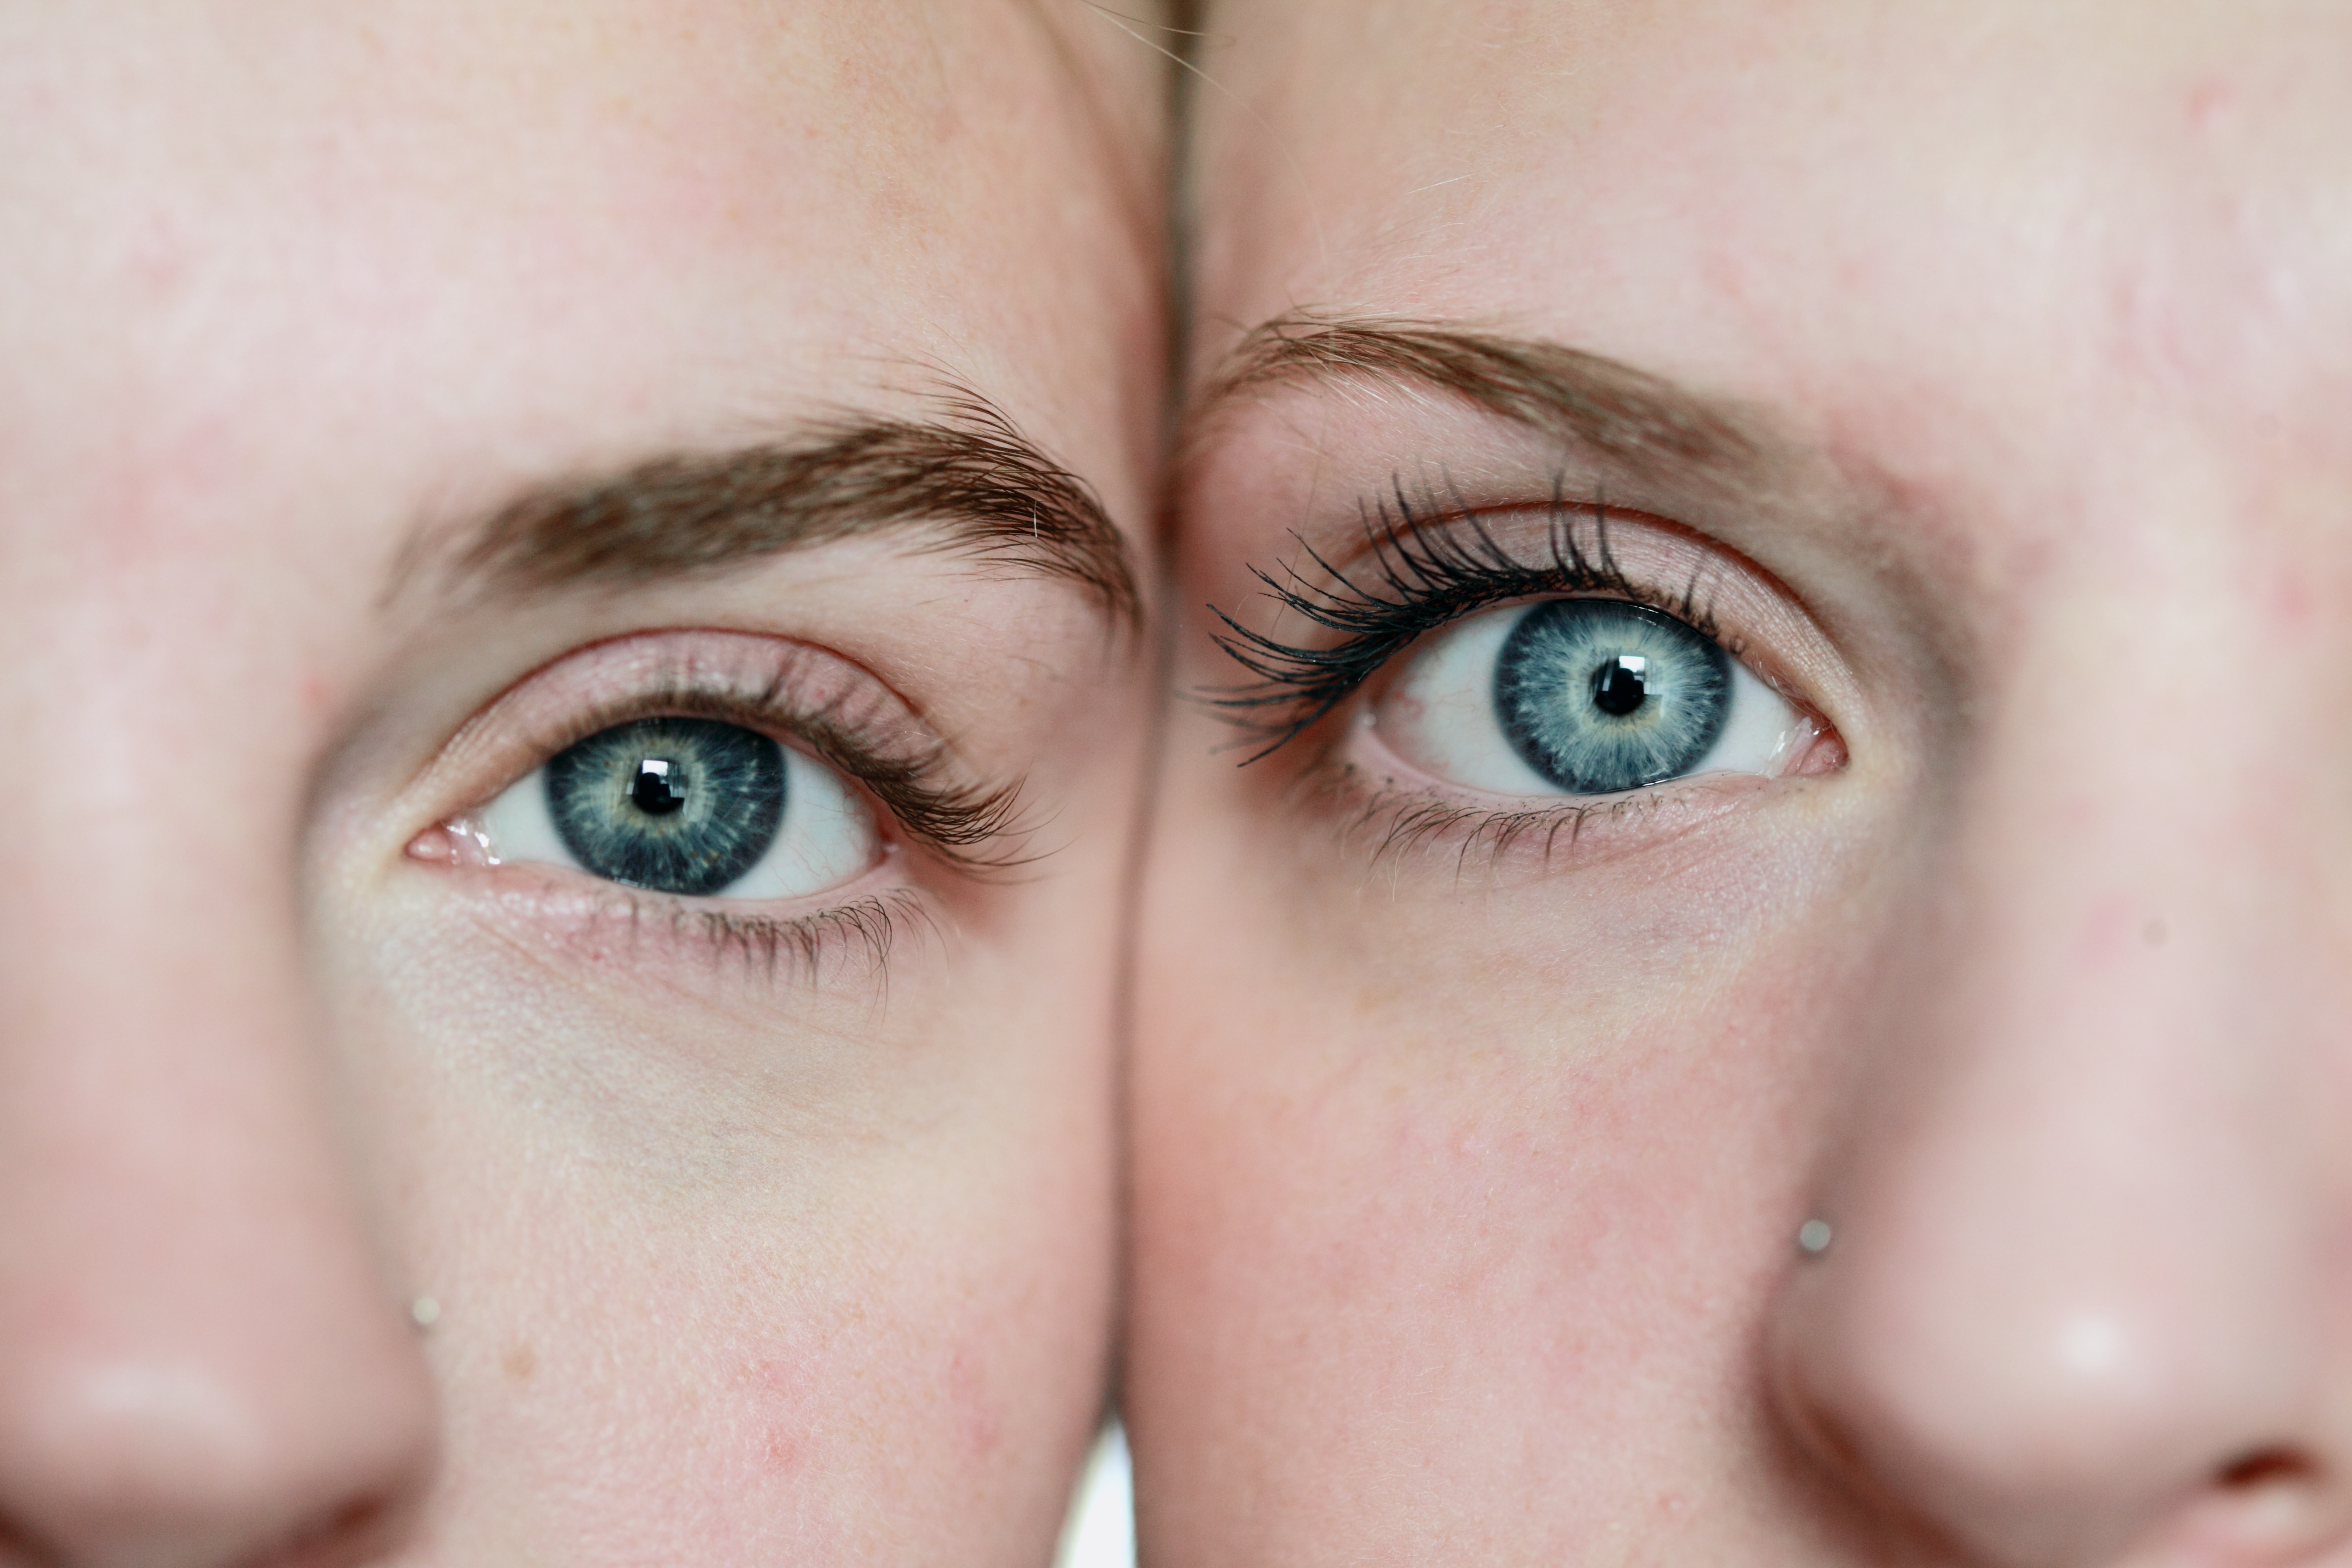 A close up of two girls with blue eyes. | Source: Unsplash